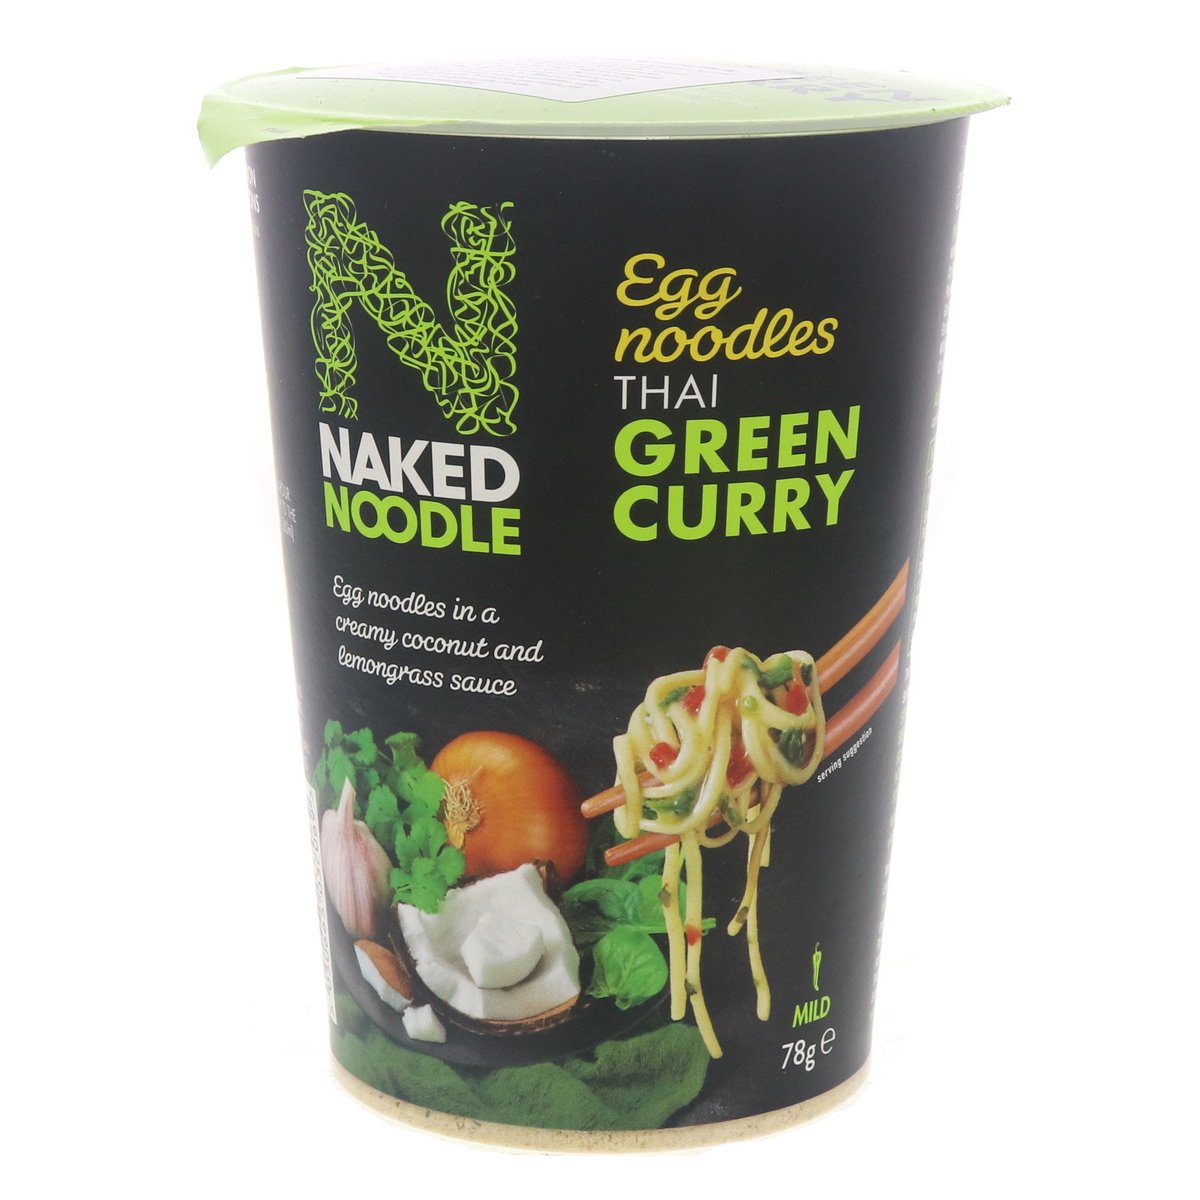 Naked Noodle Thai Green Curry Egg Noodles 78g Online at Best Price ...